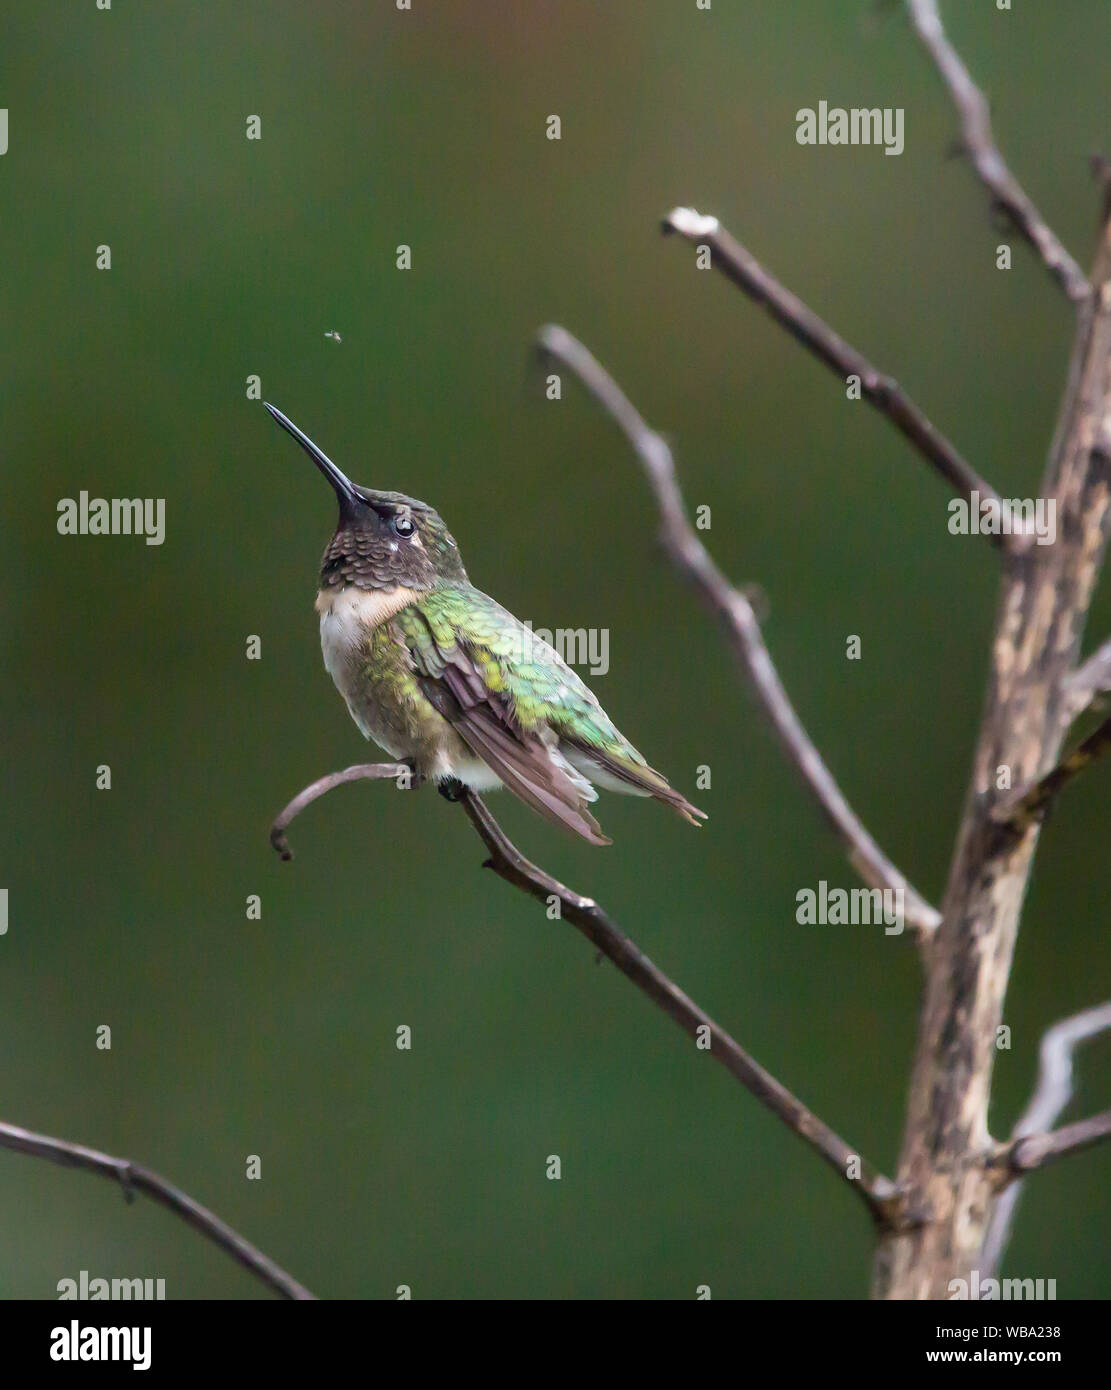 A male ruby-throated hummingbird eyes an insect while perched on a yucca flower stalk. Stock Photo